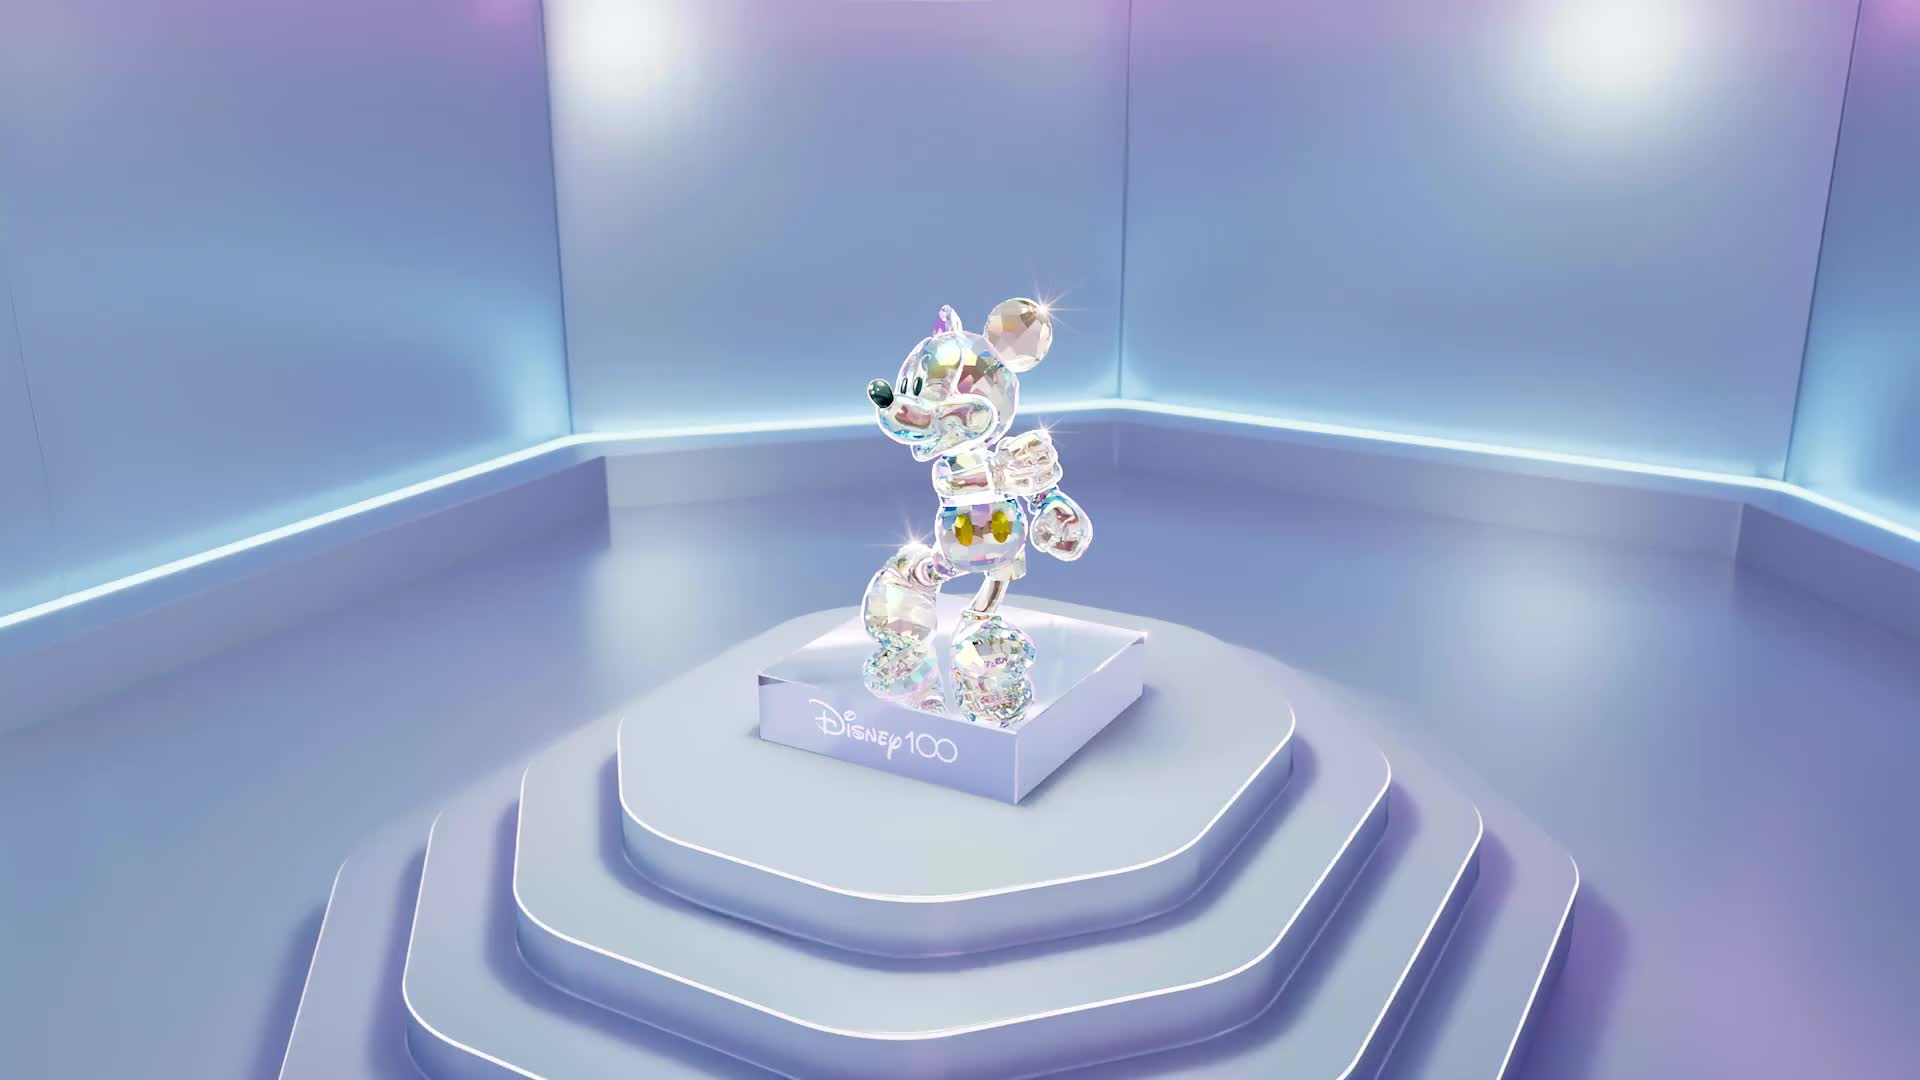 Official Disney 100 Gifts | 100 Years of Magic | Swarovski US